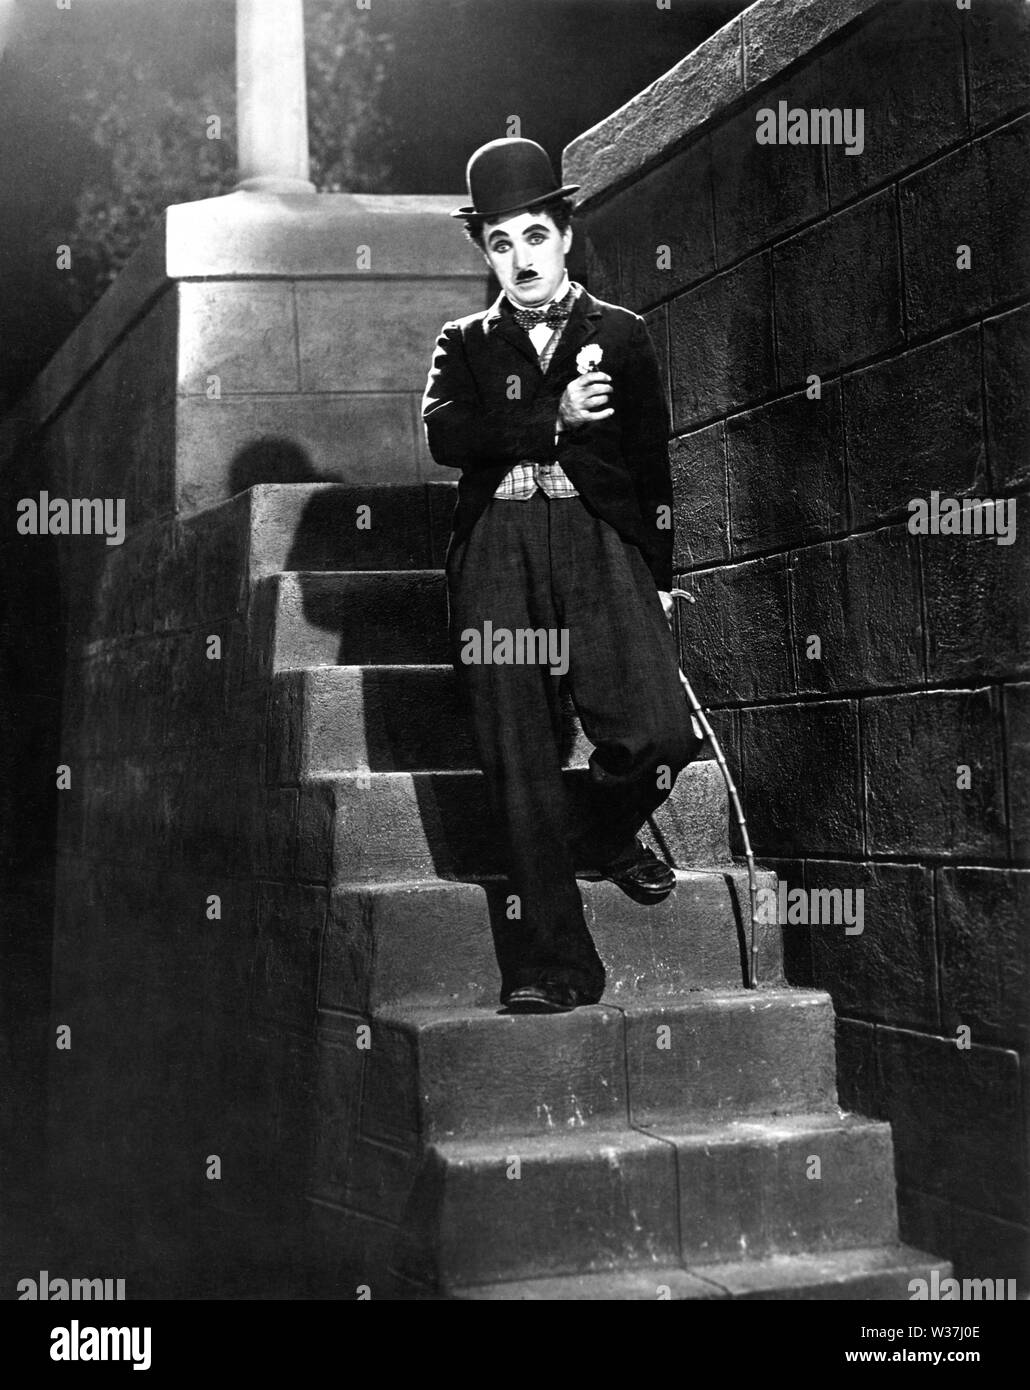 CHARLIE CHAPLIN as the Tramp in CITY LIGHTS 1931 written and directed by Charles Chaplin silent movie comedy with music score Charles Chaplin Productions / United Artists Stock Photo